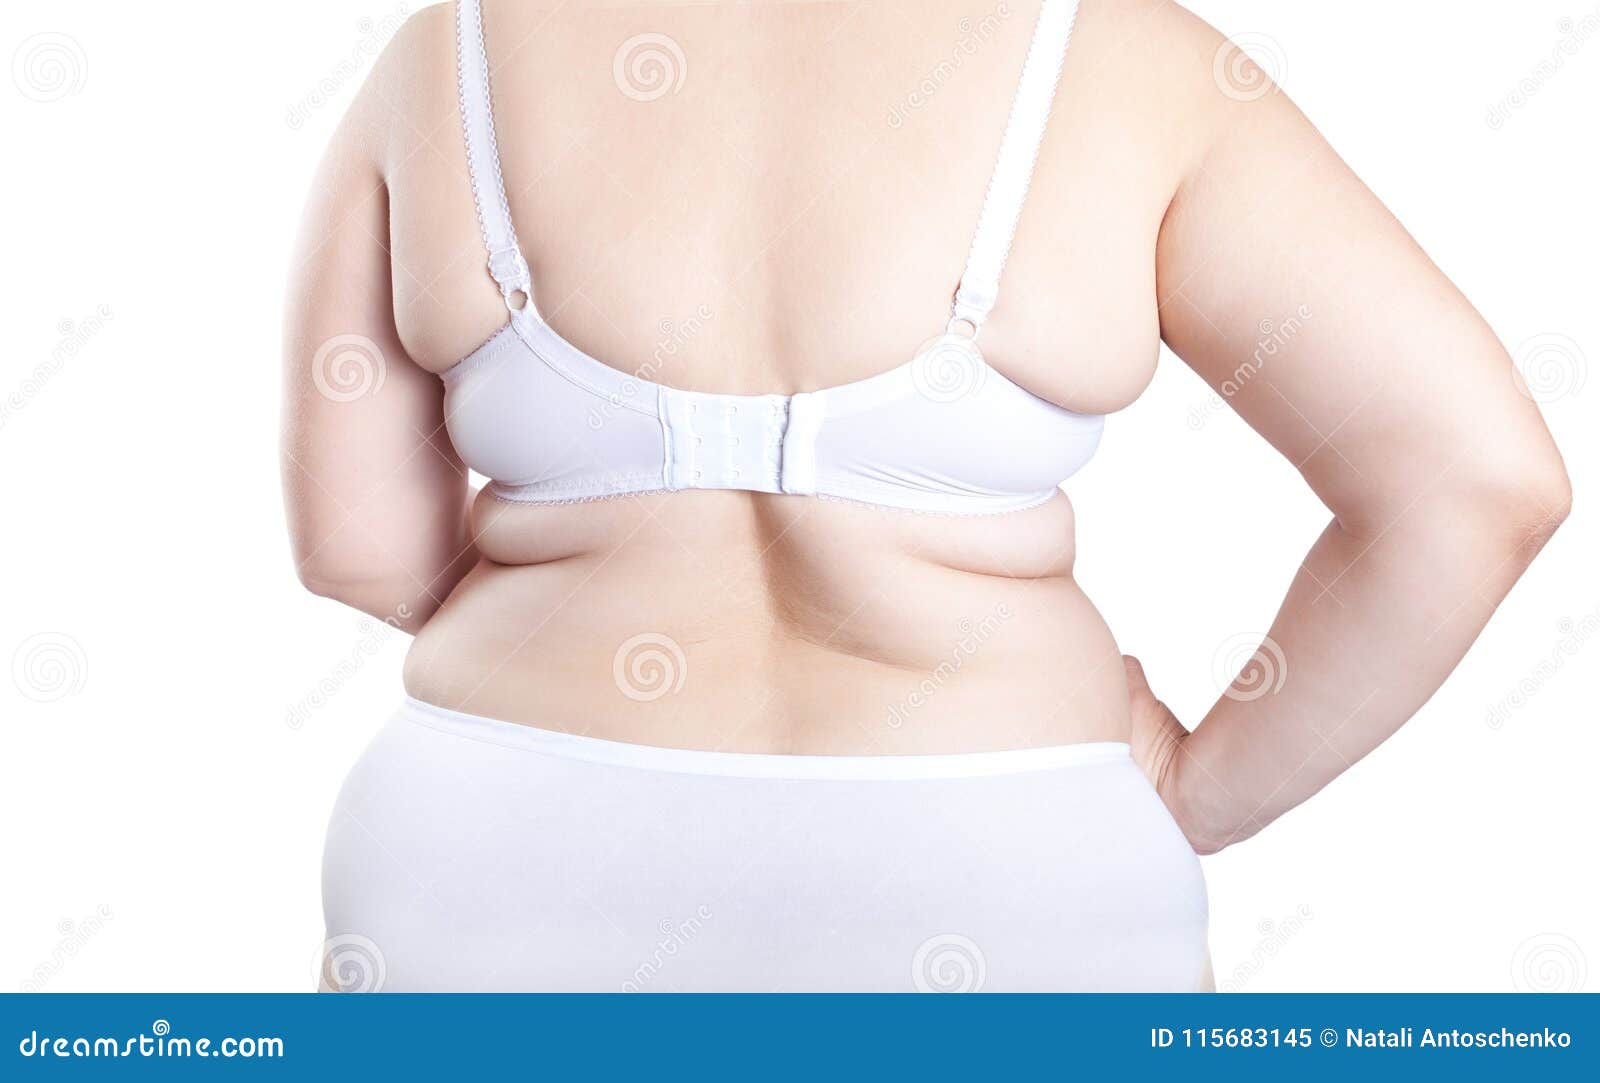 Fat Woman in Lingerie Overweight, Obesity Stock Image - Image of hand,  lifestyle: 115683145